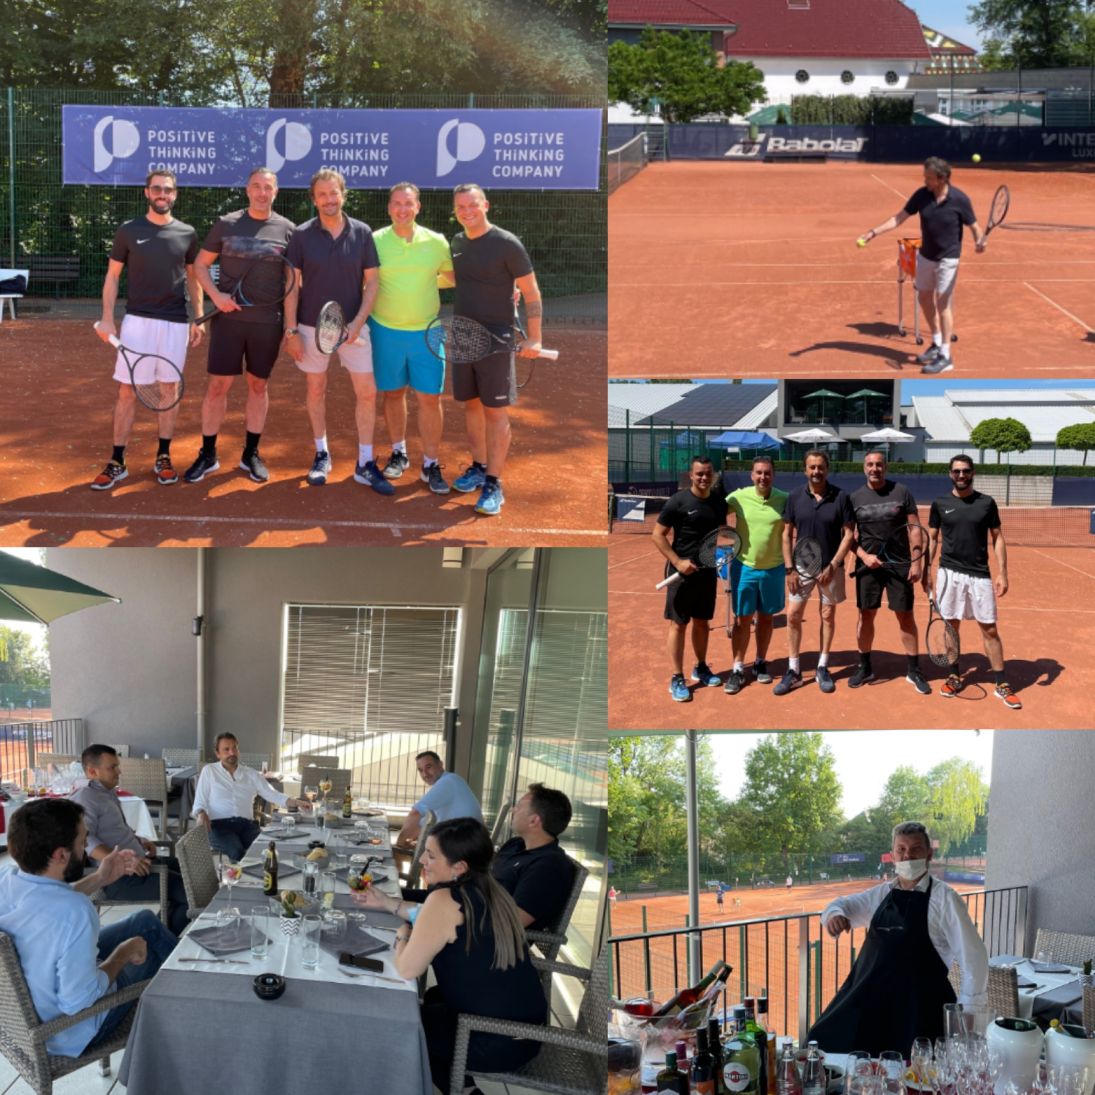 HL&Co - Luxembourg - Tennis